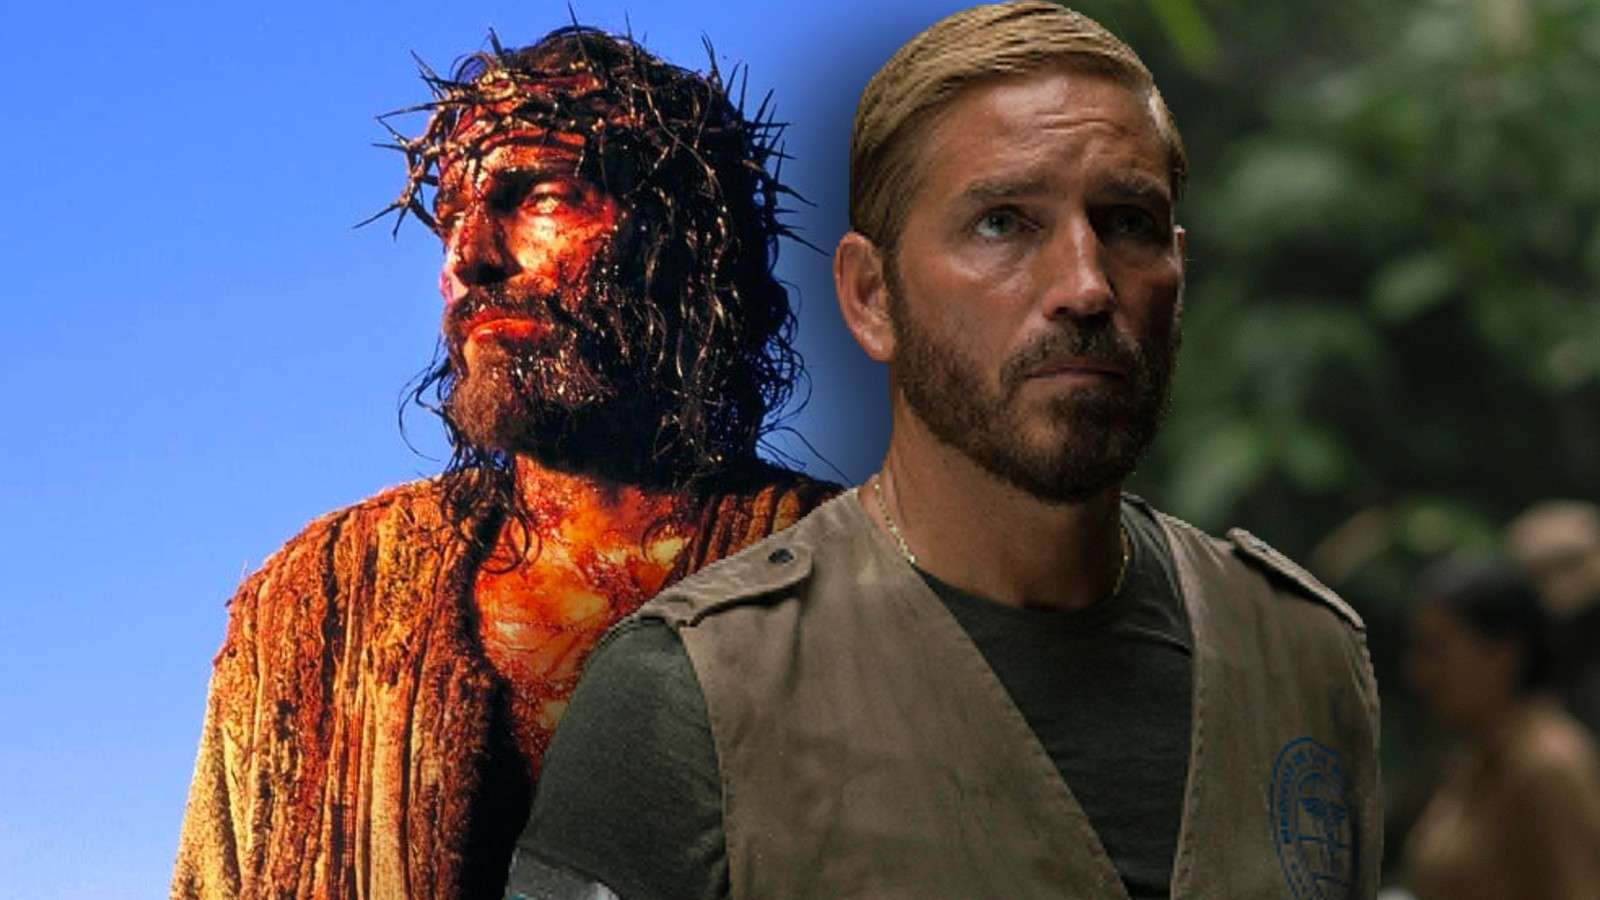 Jim Caviezel as Jesus in The Passion of the Christ and Tim Ballard in Sound of Freedom